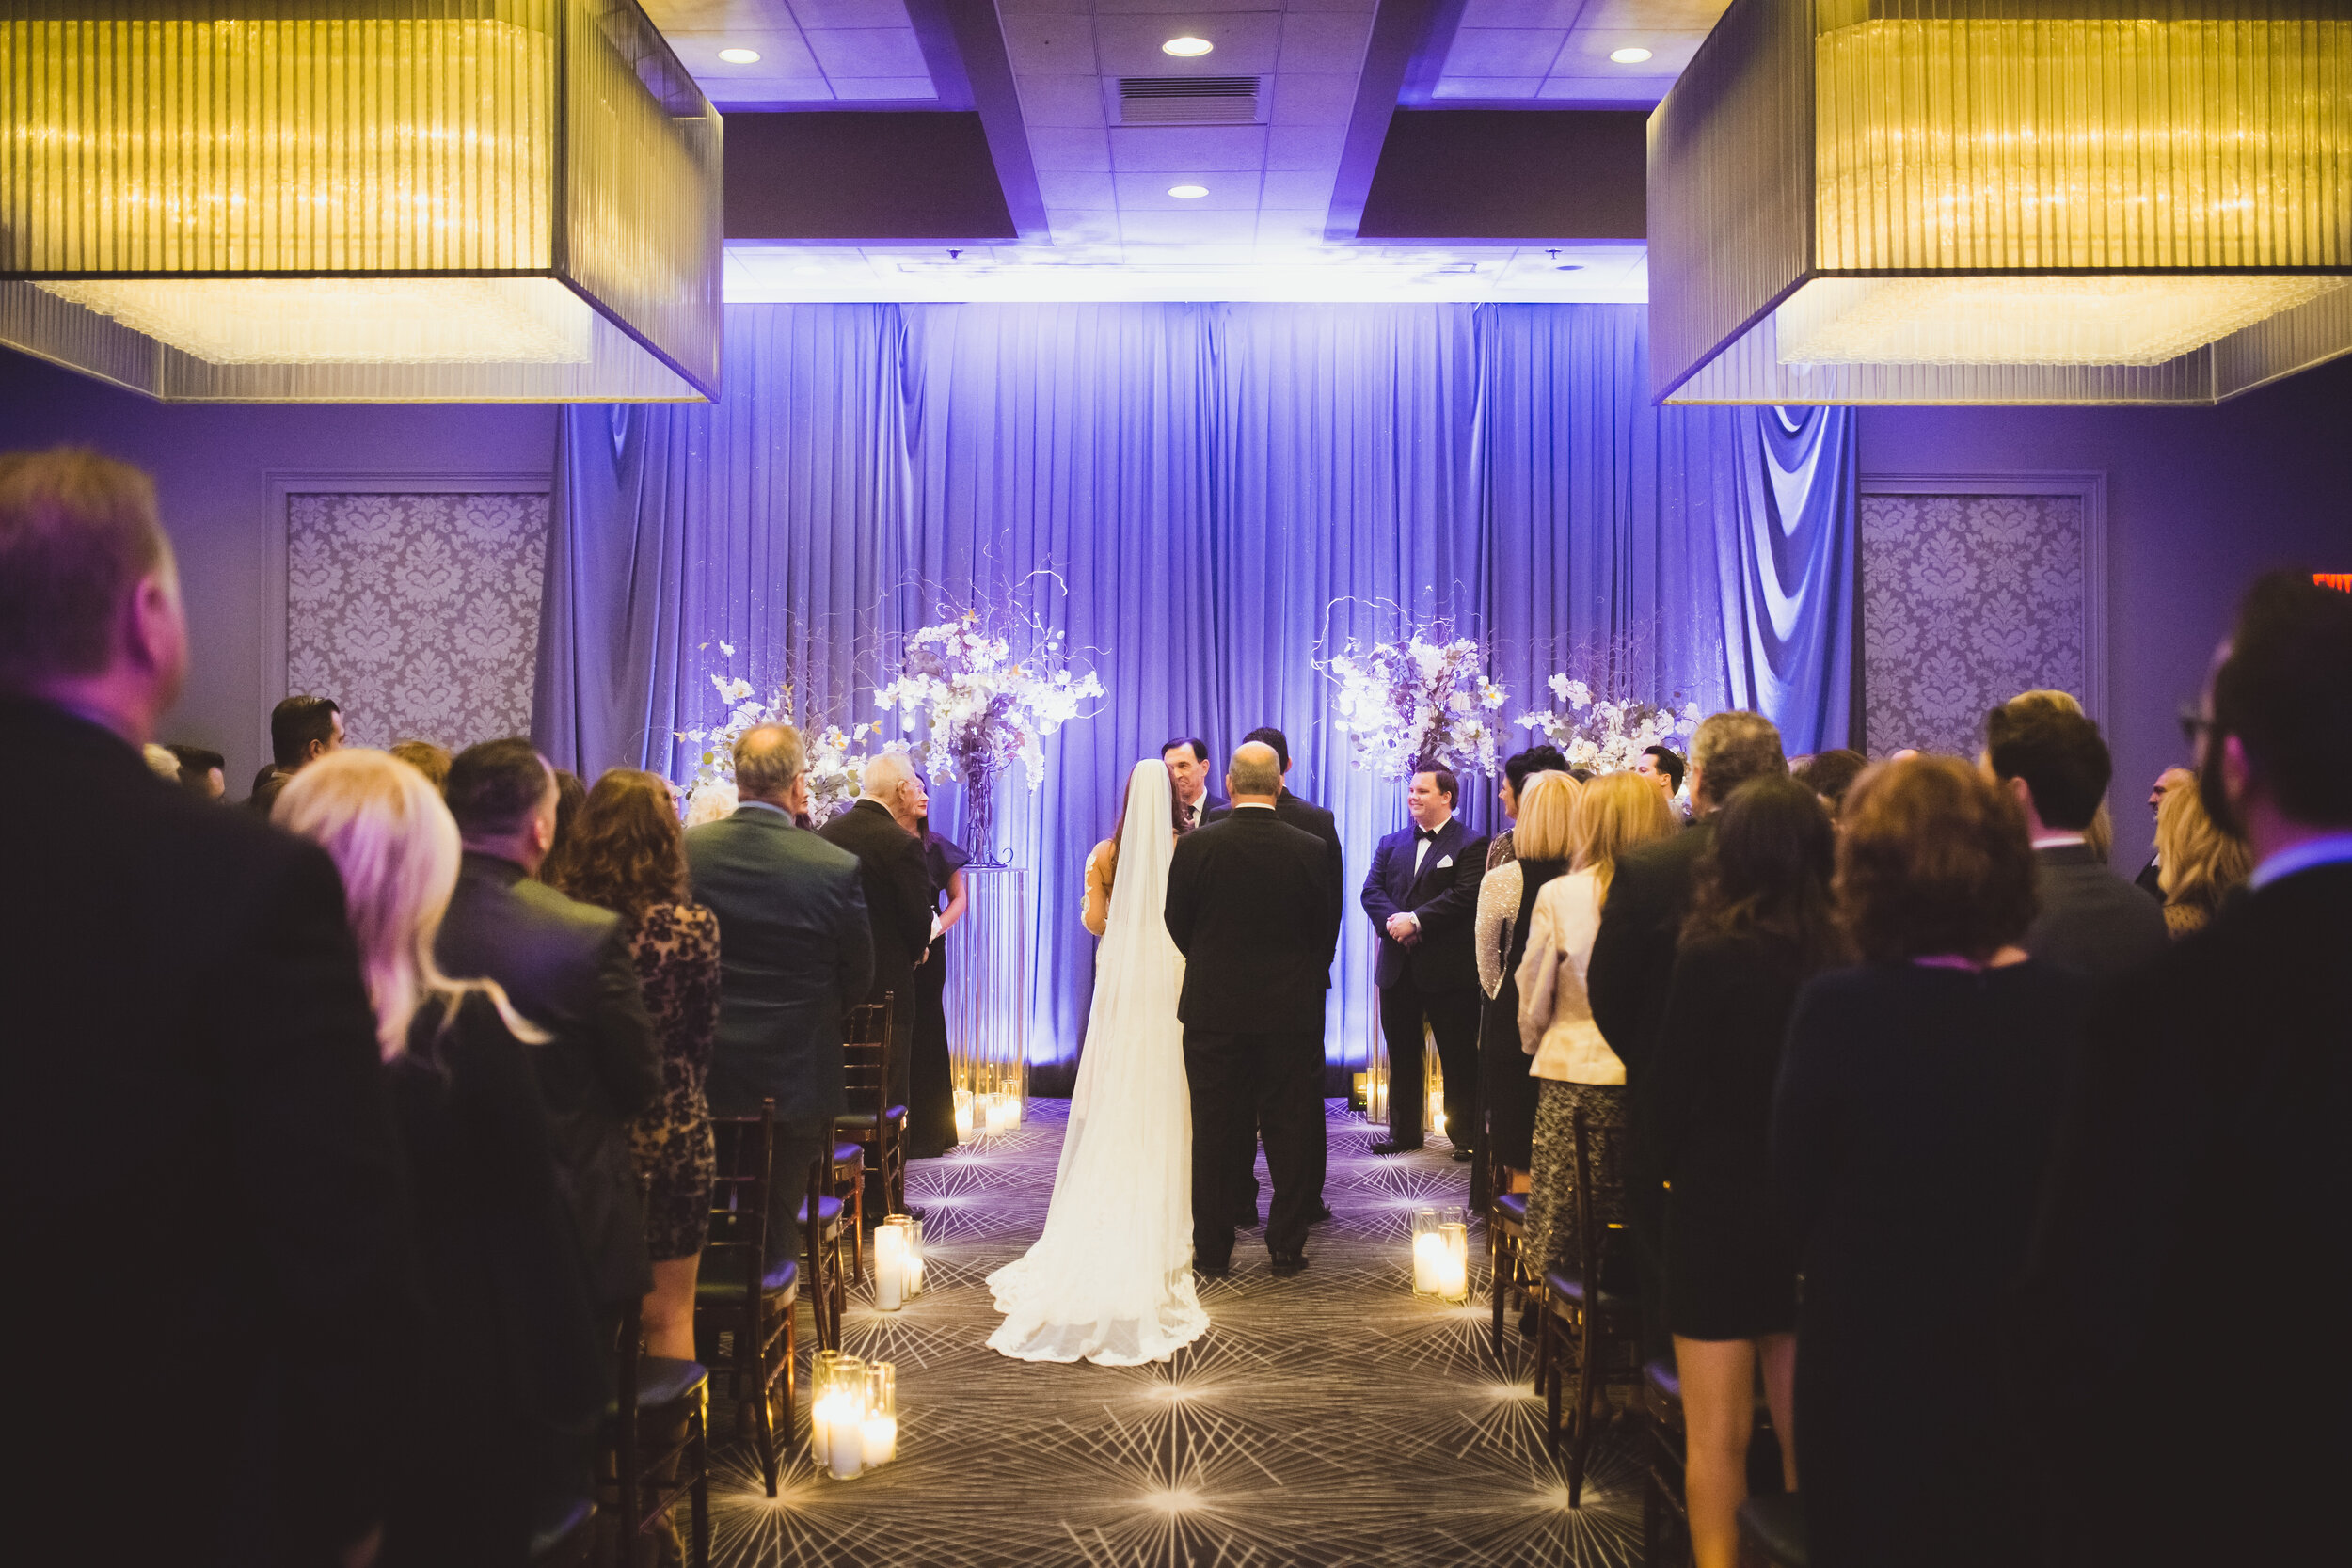 Elegant winter wedding at The Estate by Gene &amp; Georgetti captured by Tim Gunier Photography. See more winter wedding ideas at CHItheeWED.com!